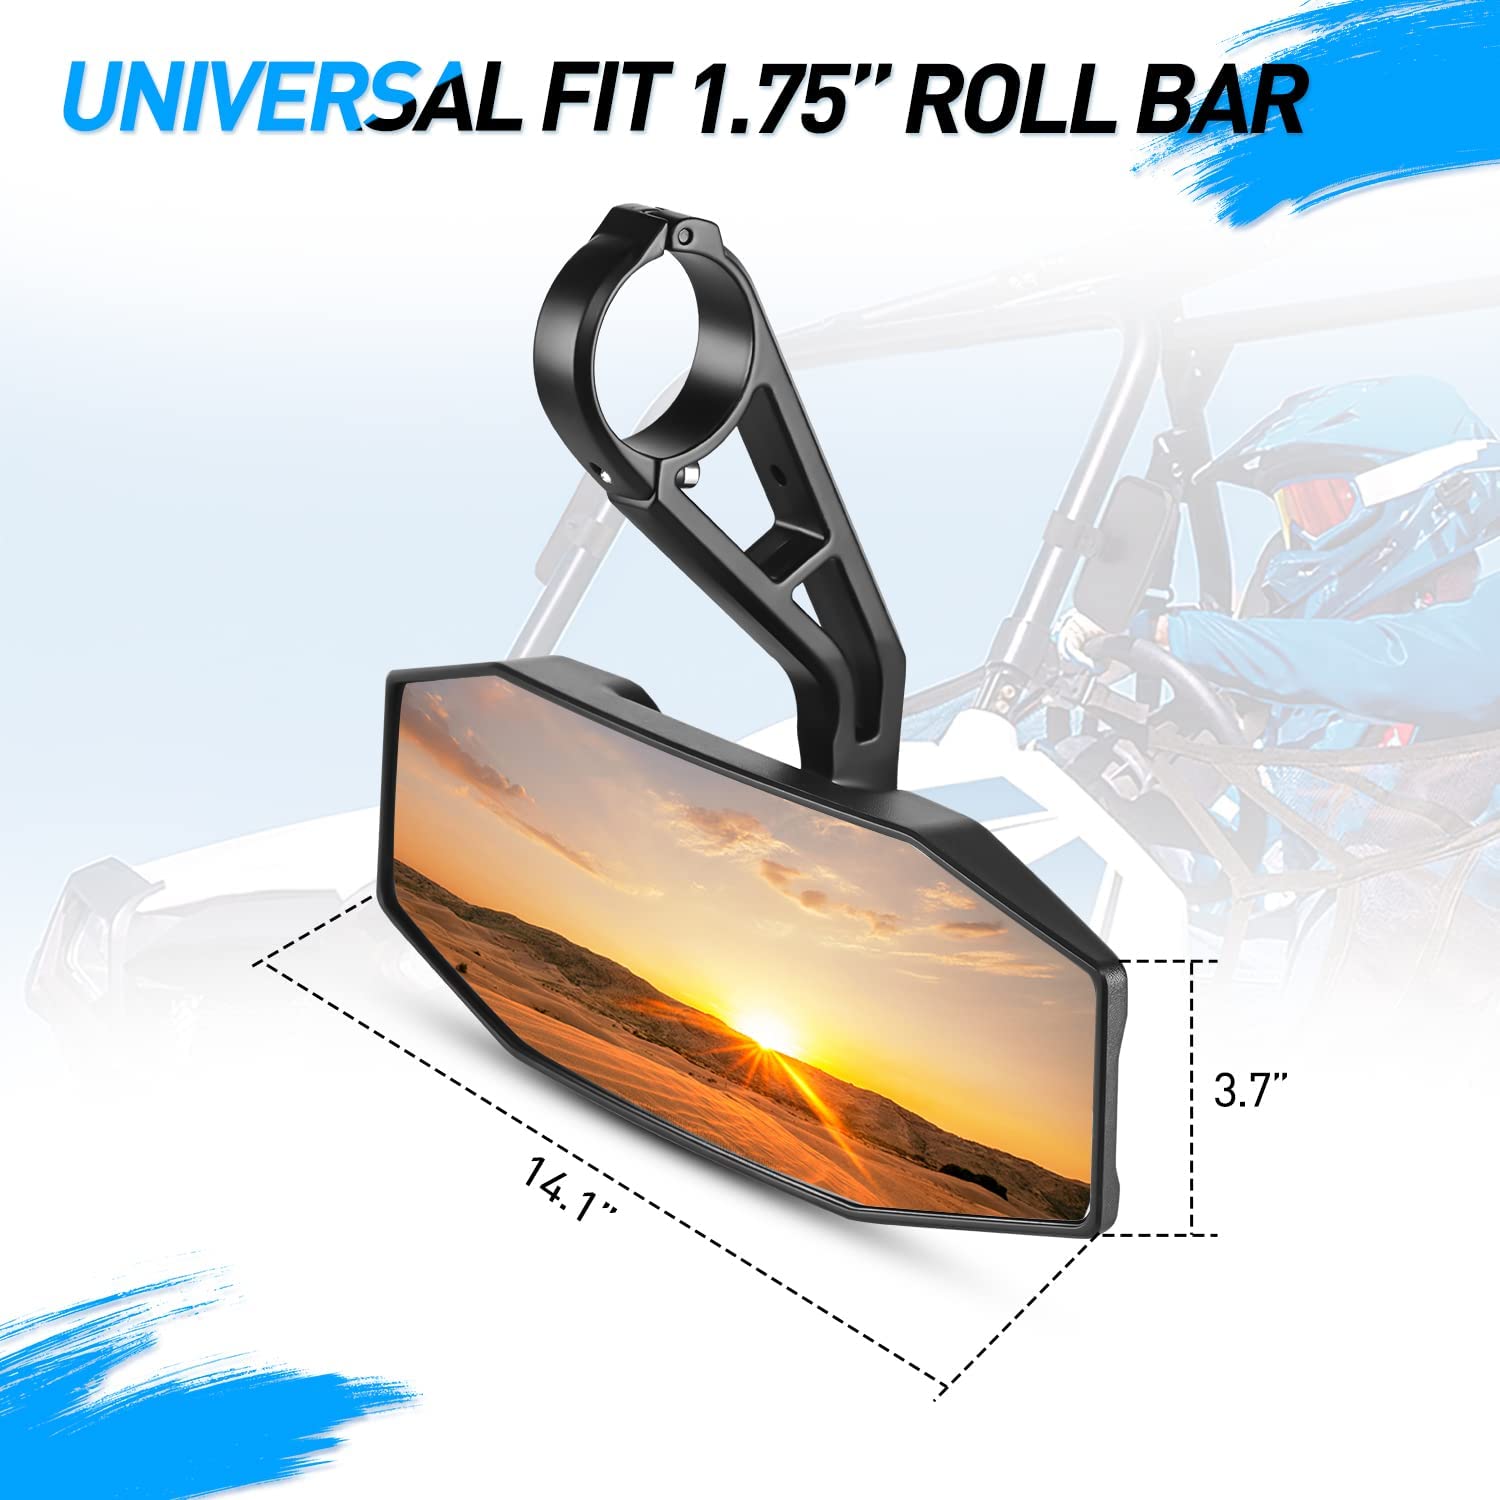 Rear View Center Mirror Compatible with RZR for 1.75” Roll Bar, Wide angle UTV rearview mirror Compatible with 2015-2023 Polaris general RZR Ranger 570/900/1000 XP, Arctic Cat Wildcat #2881540